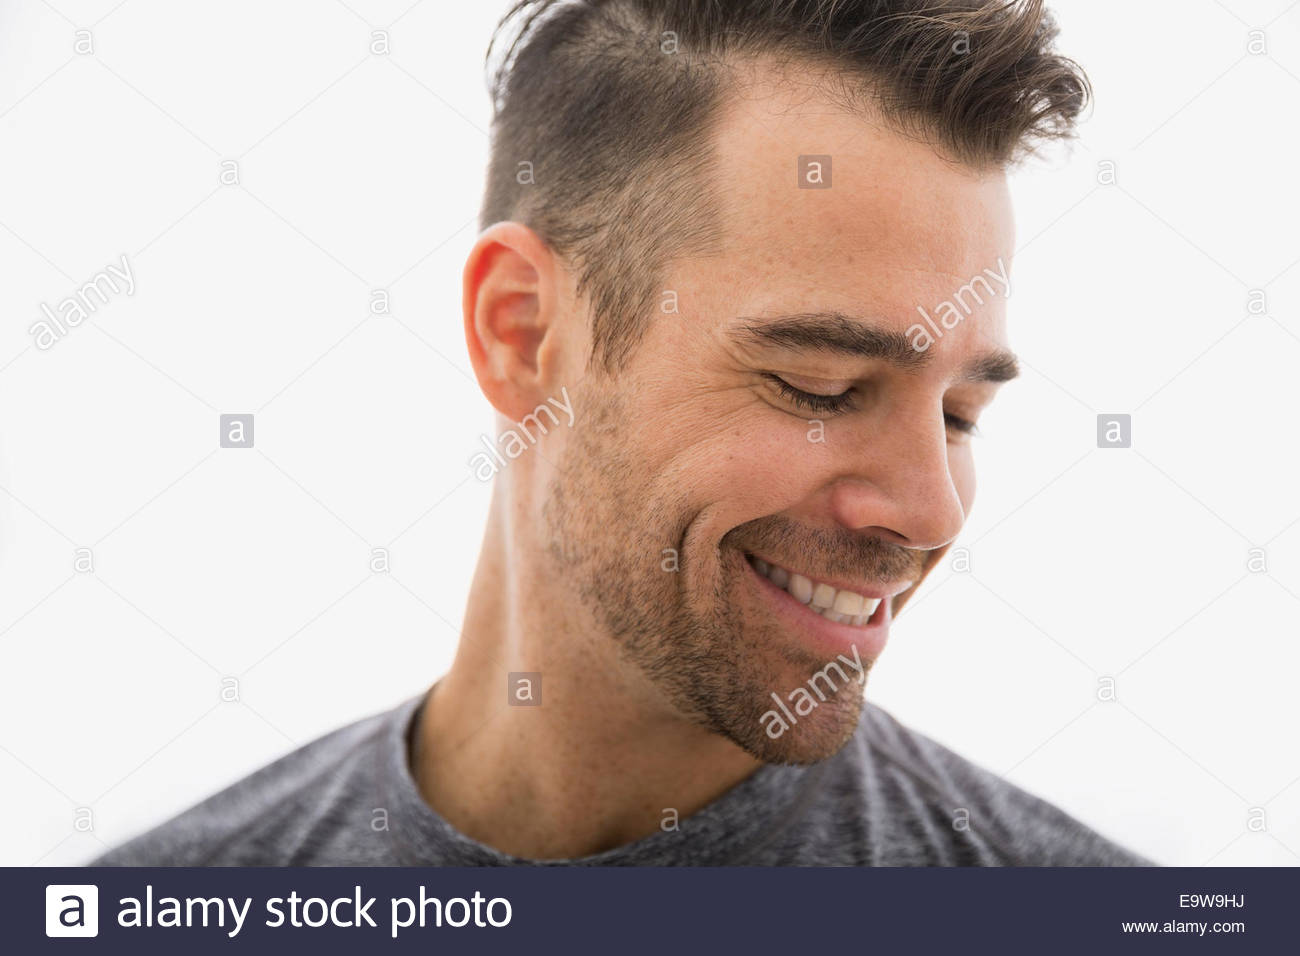 Close up of smiling brunette man looking down Stock Photo